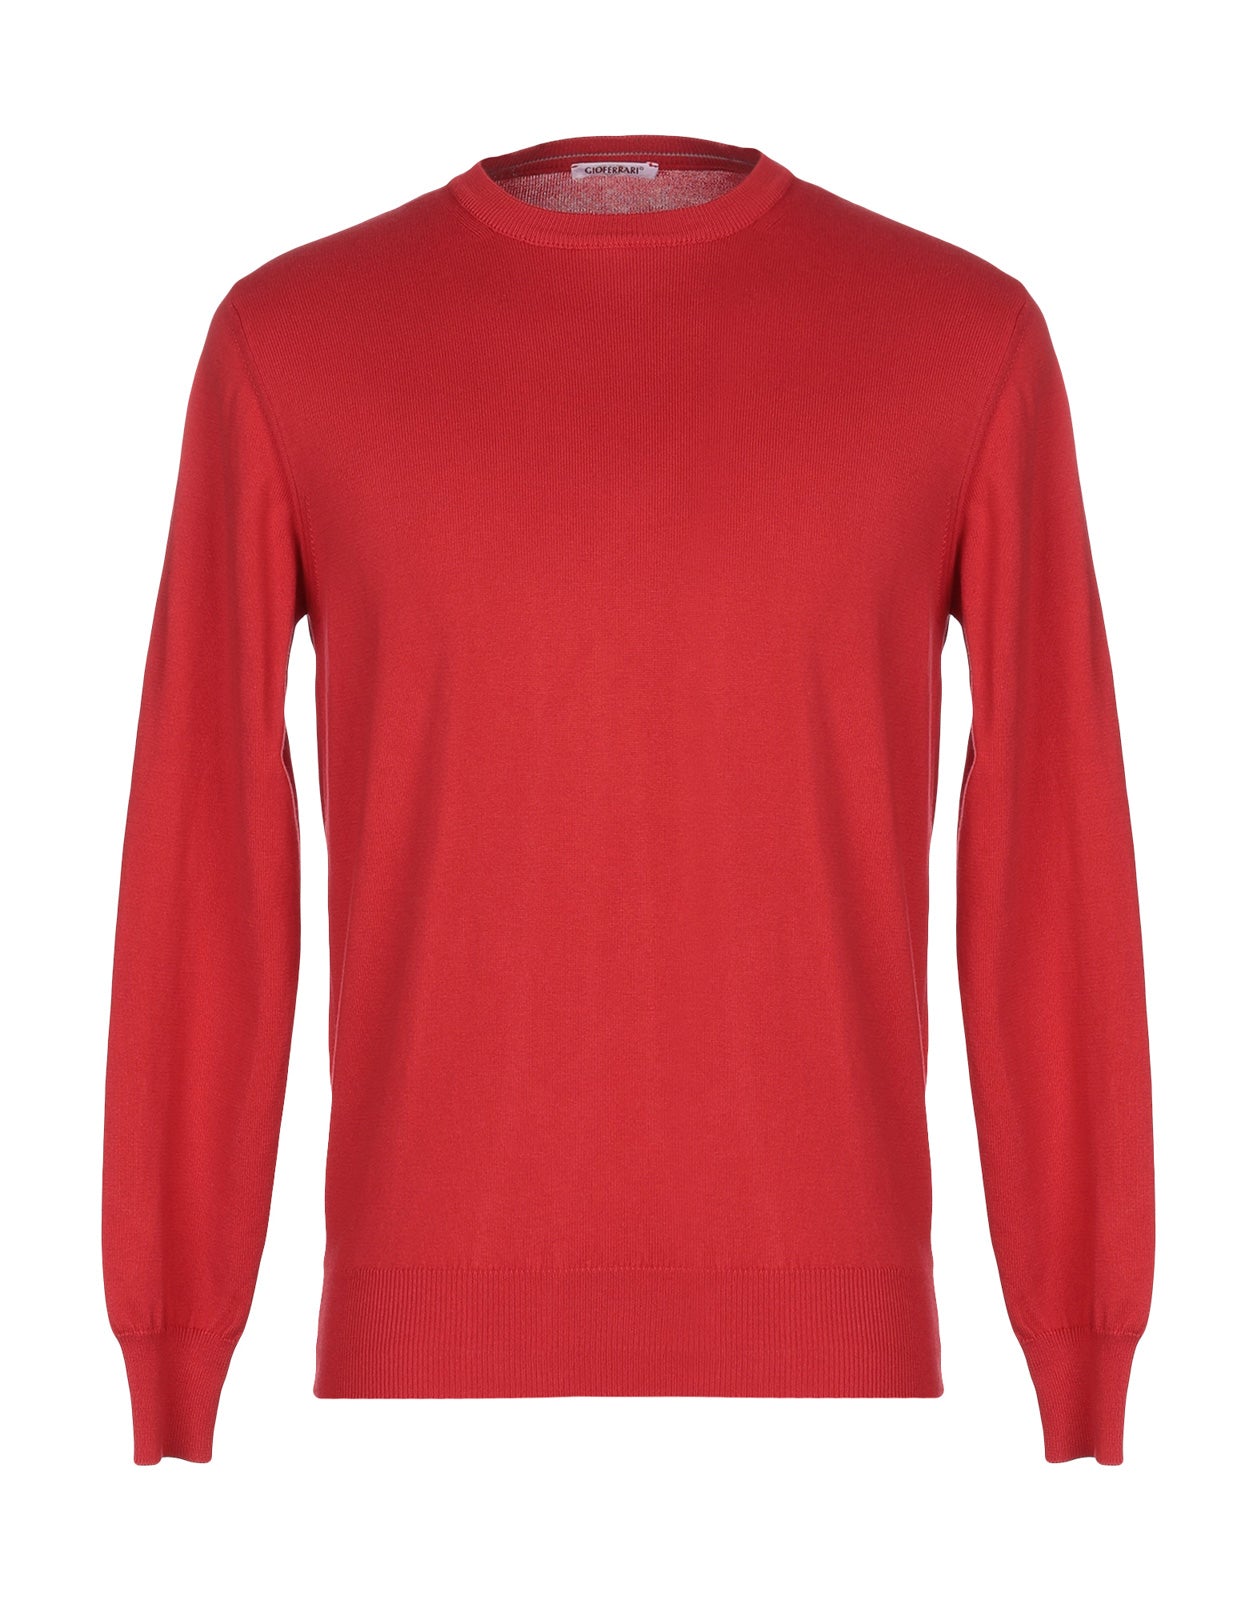 GIOFERRARI Jumper Size 56 Thin Knit Crew Neck Made in Italy RRP €125 gallery main photo